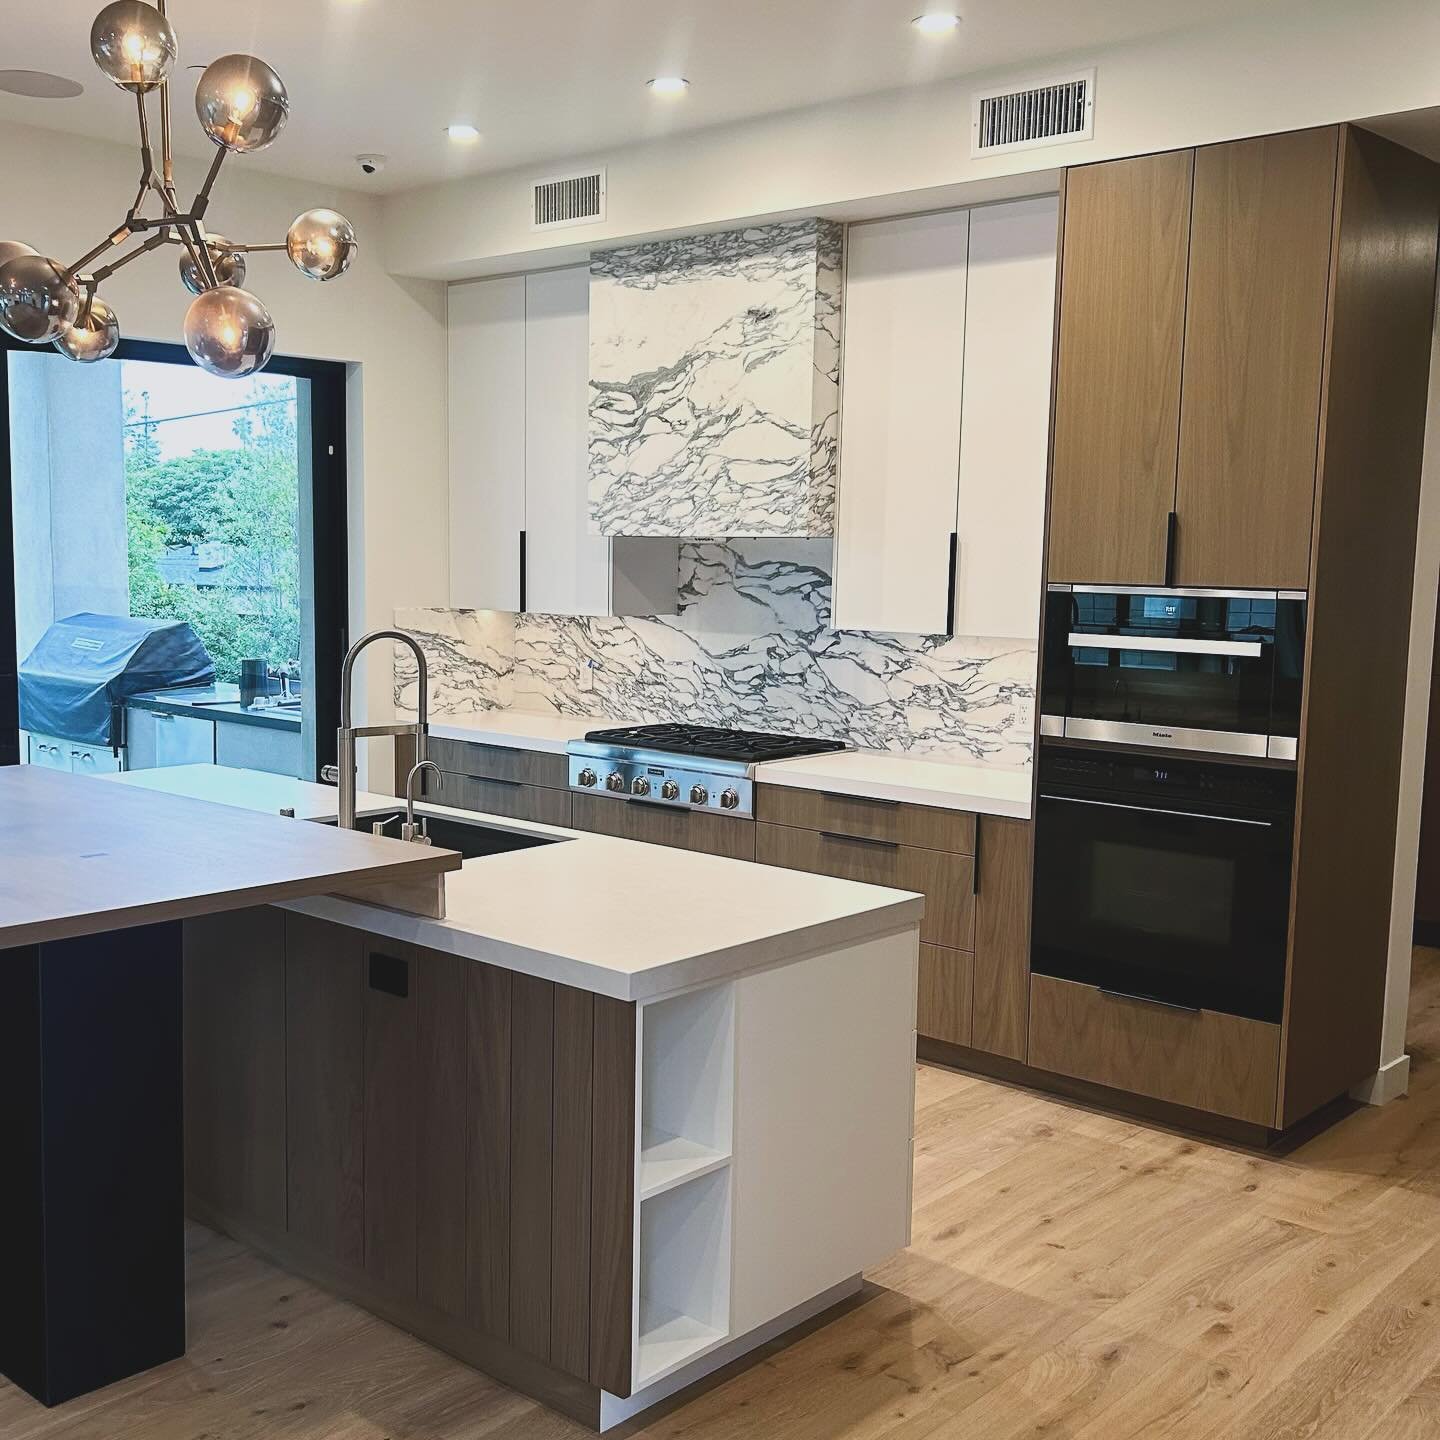 Elegant update for this modern home. An unexpected renovation that turned into a beautiful art piece. Gorgeous custom cabinetry by @adelsmancc  #interiors #kitchen #modern #cali #home #marble #artpiece #custom #cabinetry #silestonebycosentino